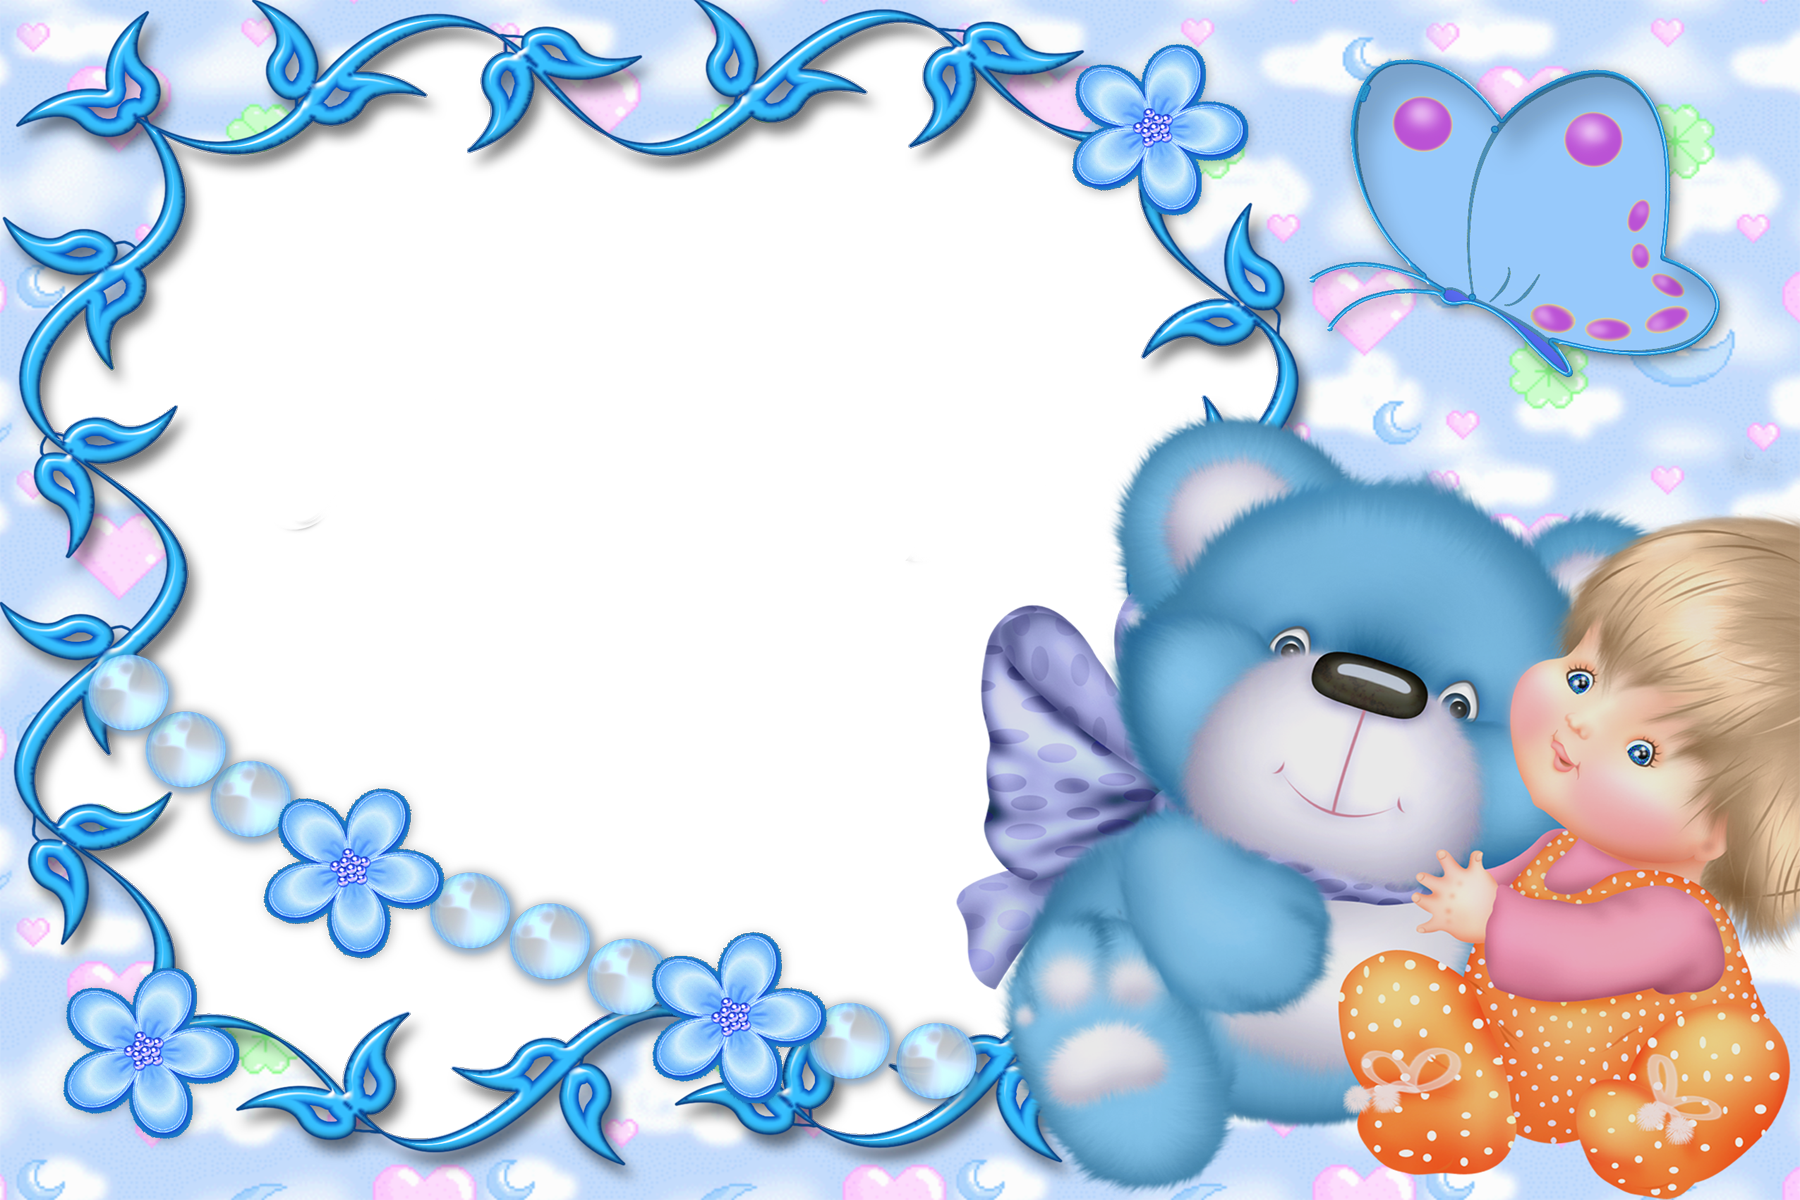 Cute Kids Blue Transparent Frame with Kid and Teddy Bear.